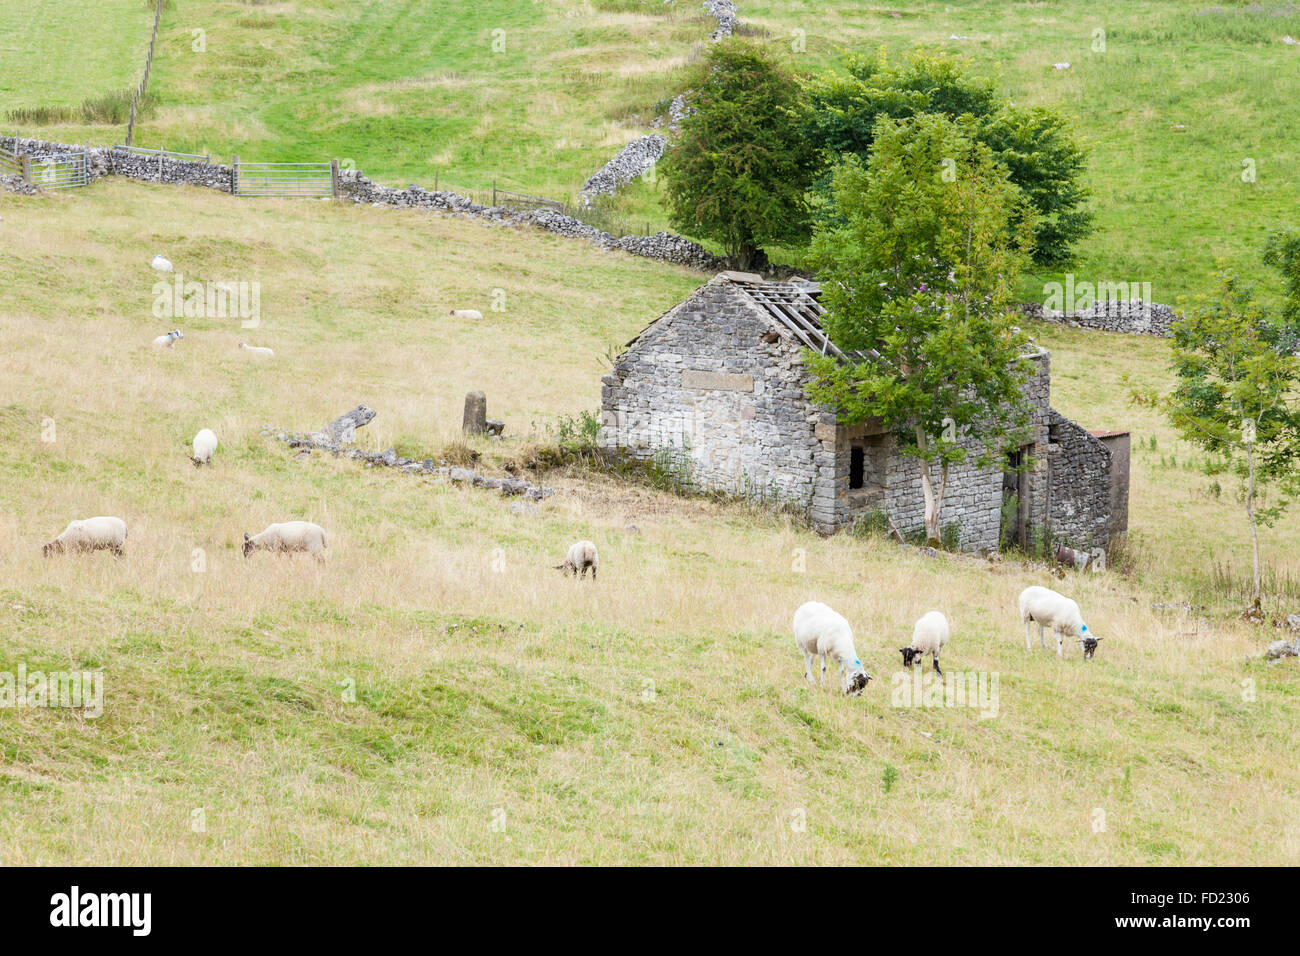 Sheep in a field around the ruins of an old farm building, Derbyshire, England, UK Stock Photo